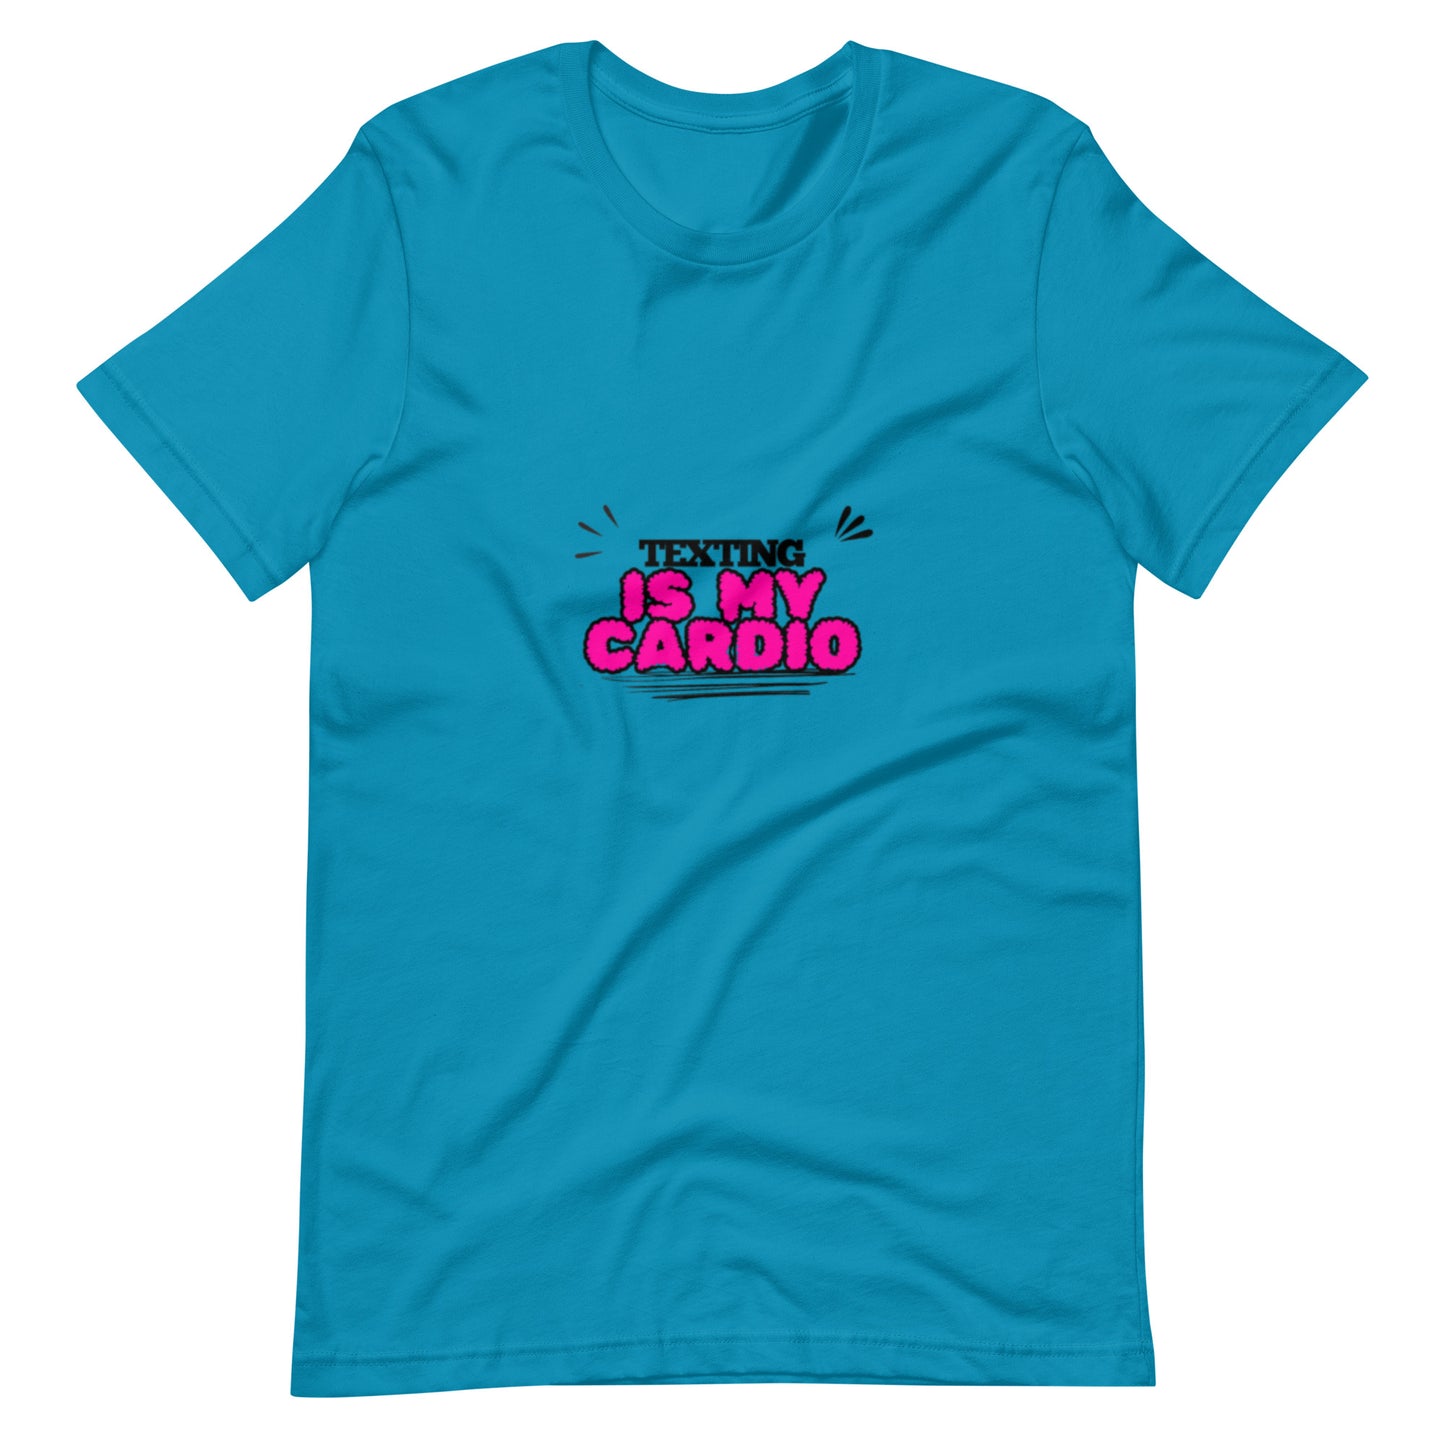 Texting is my cardio T-shirt